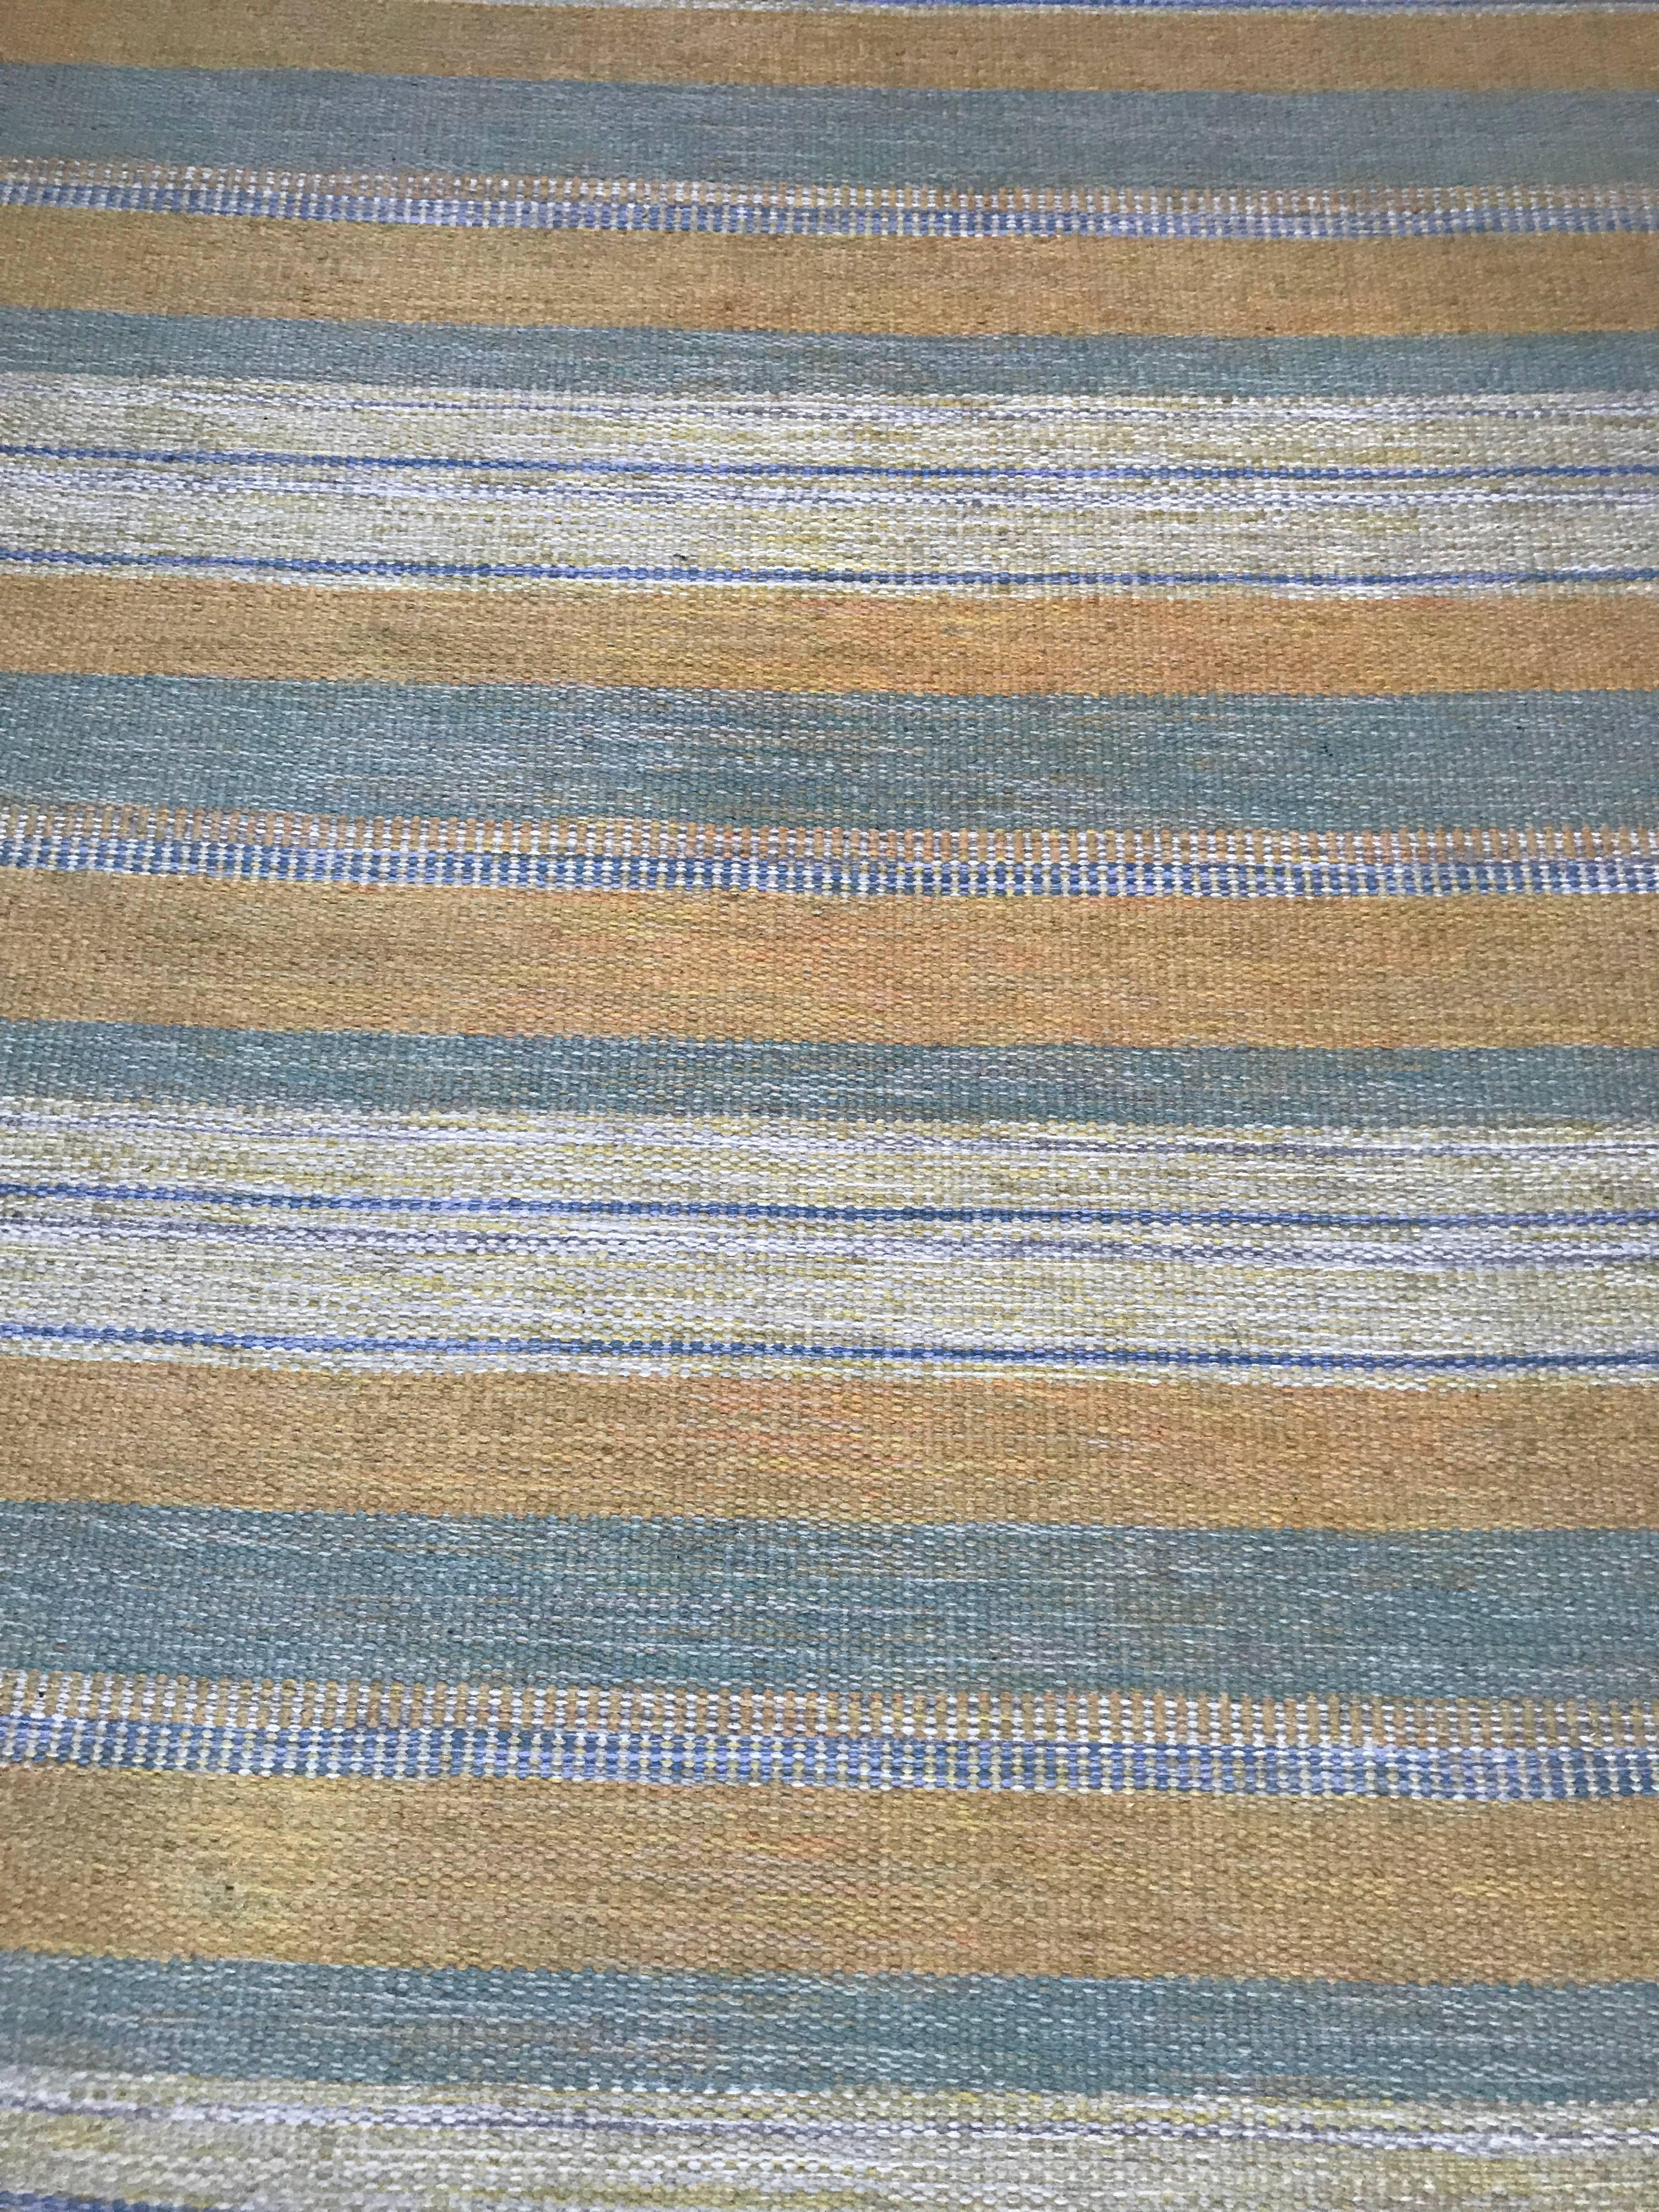 1950-1960 Swedish flat-weave Carl Malmsten wool carpet extremely rare.
This carpet is so rare that we haven’t been able to find a similar carpet after long research. This specific carpet is designed and made by Carl Malmsten and it is signed in one